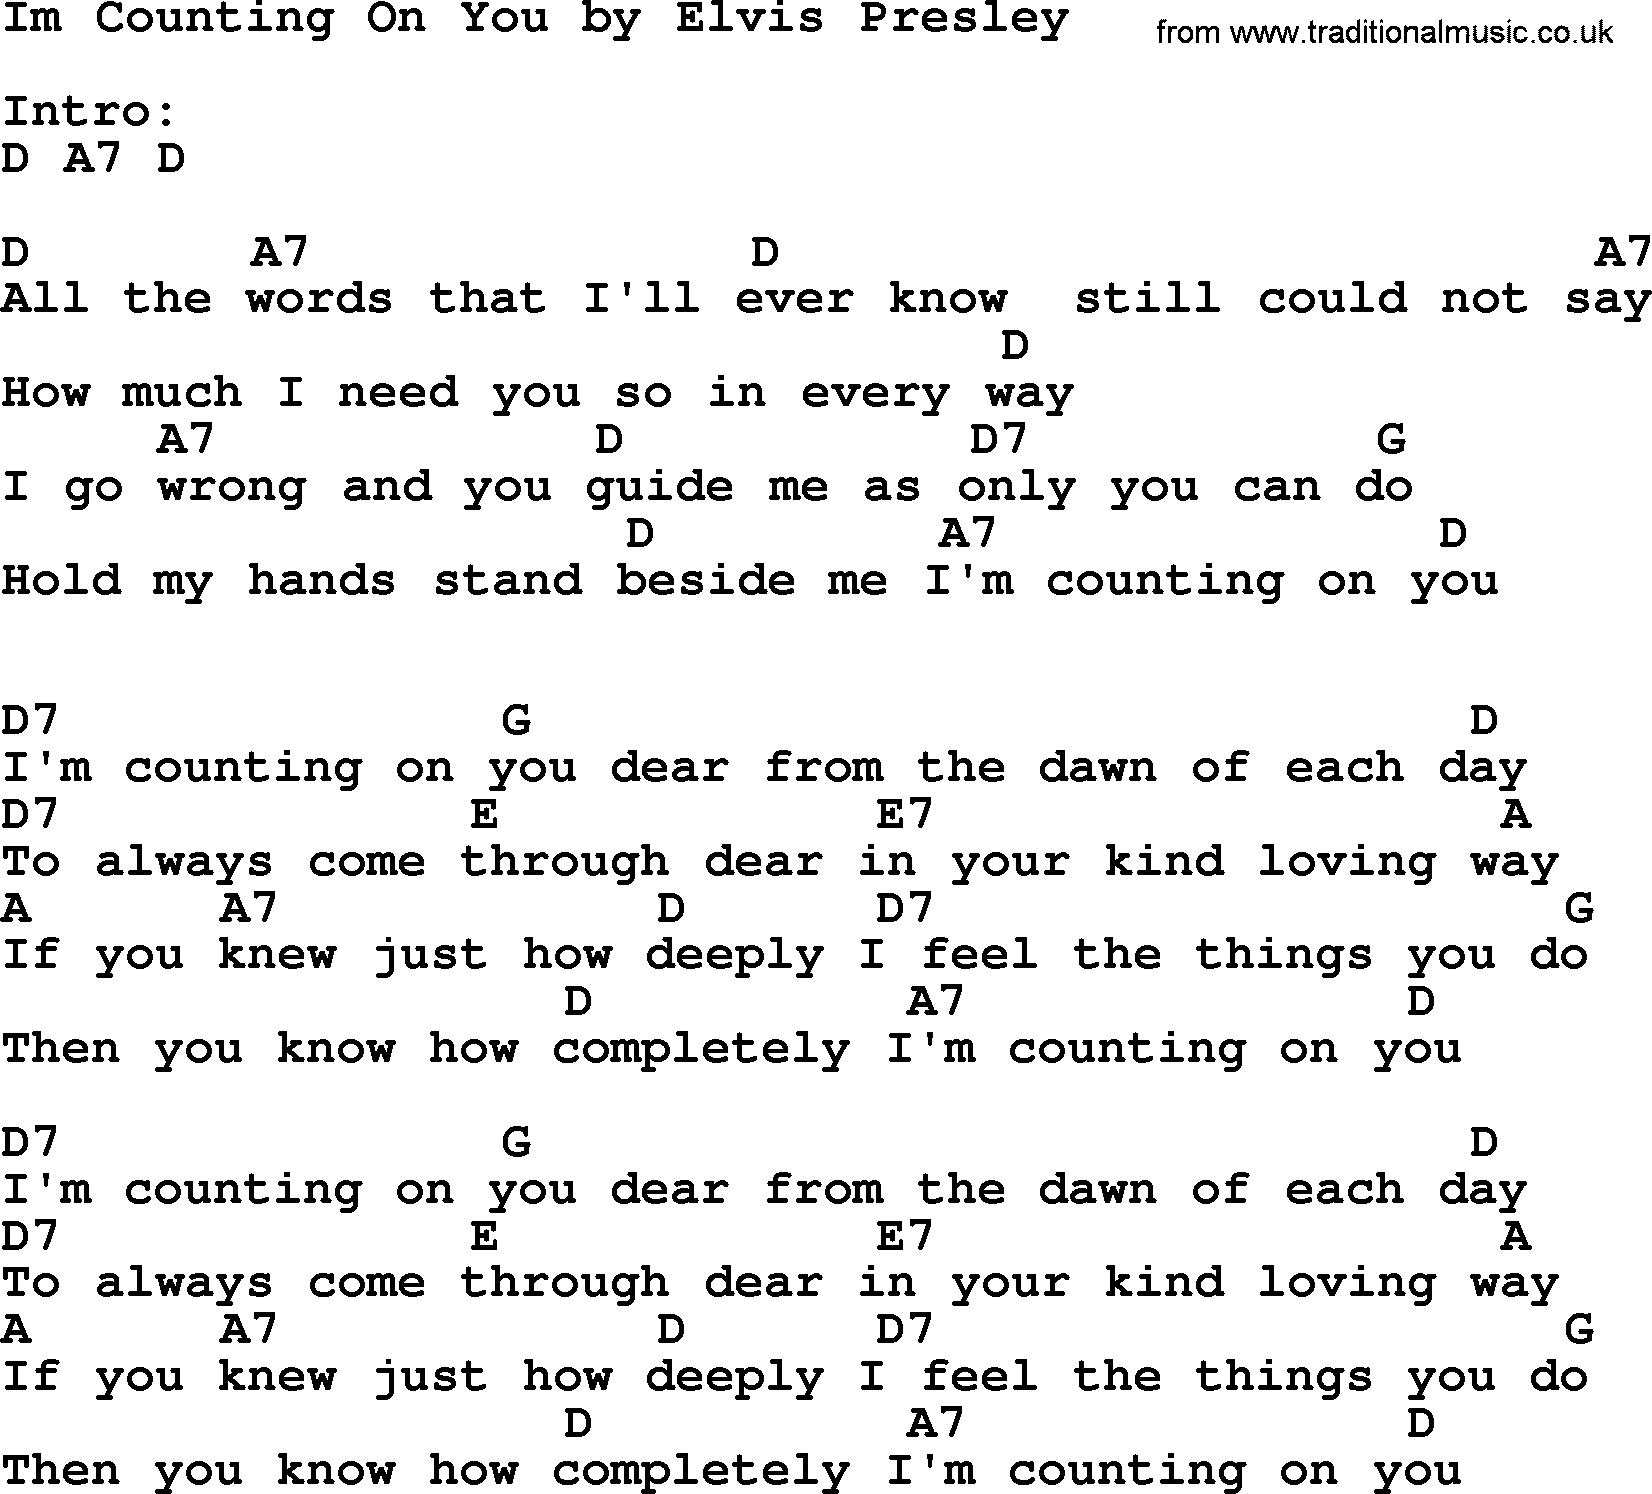 Elvis Presley song: Im Counting On You, lyrics and chords